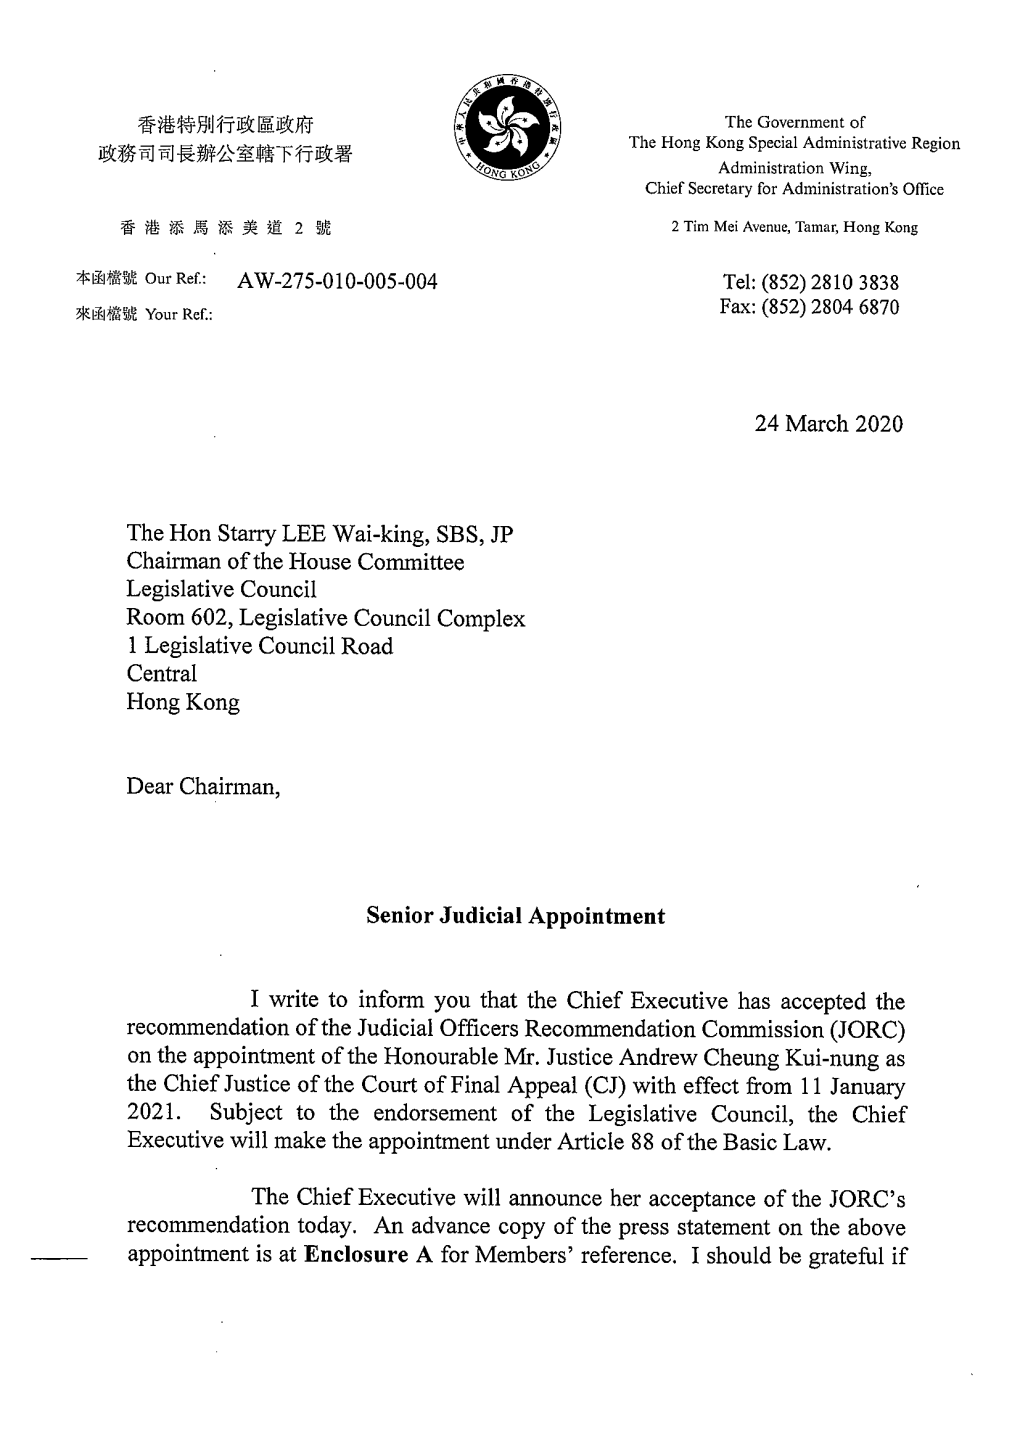 Director of Administration's Letter Dated 24 March 2020 Issued to Members